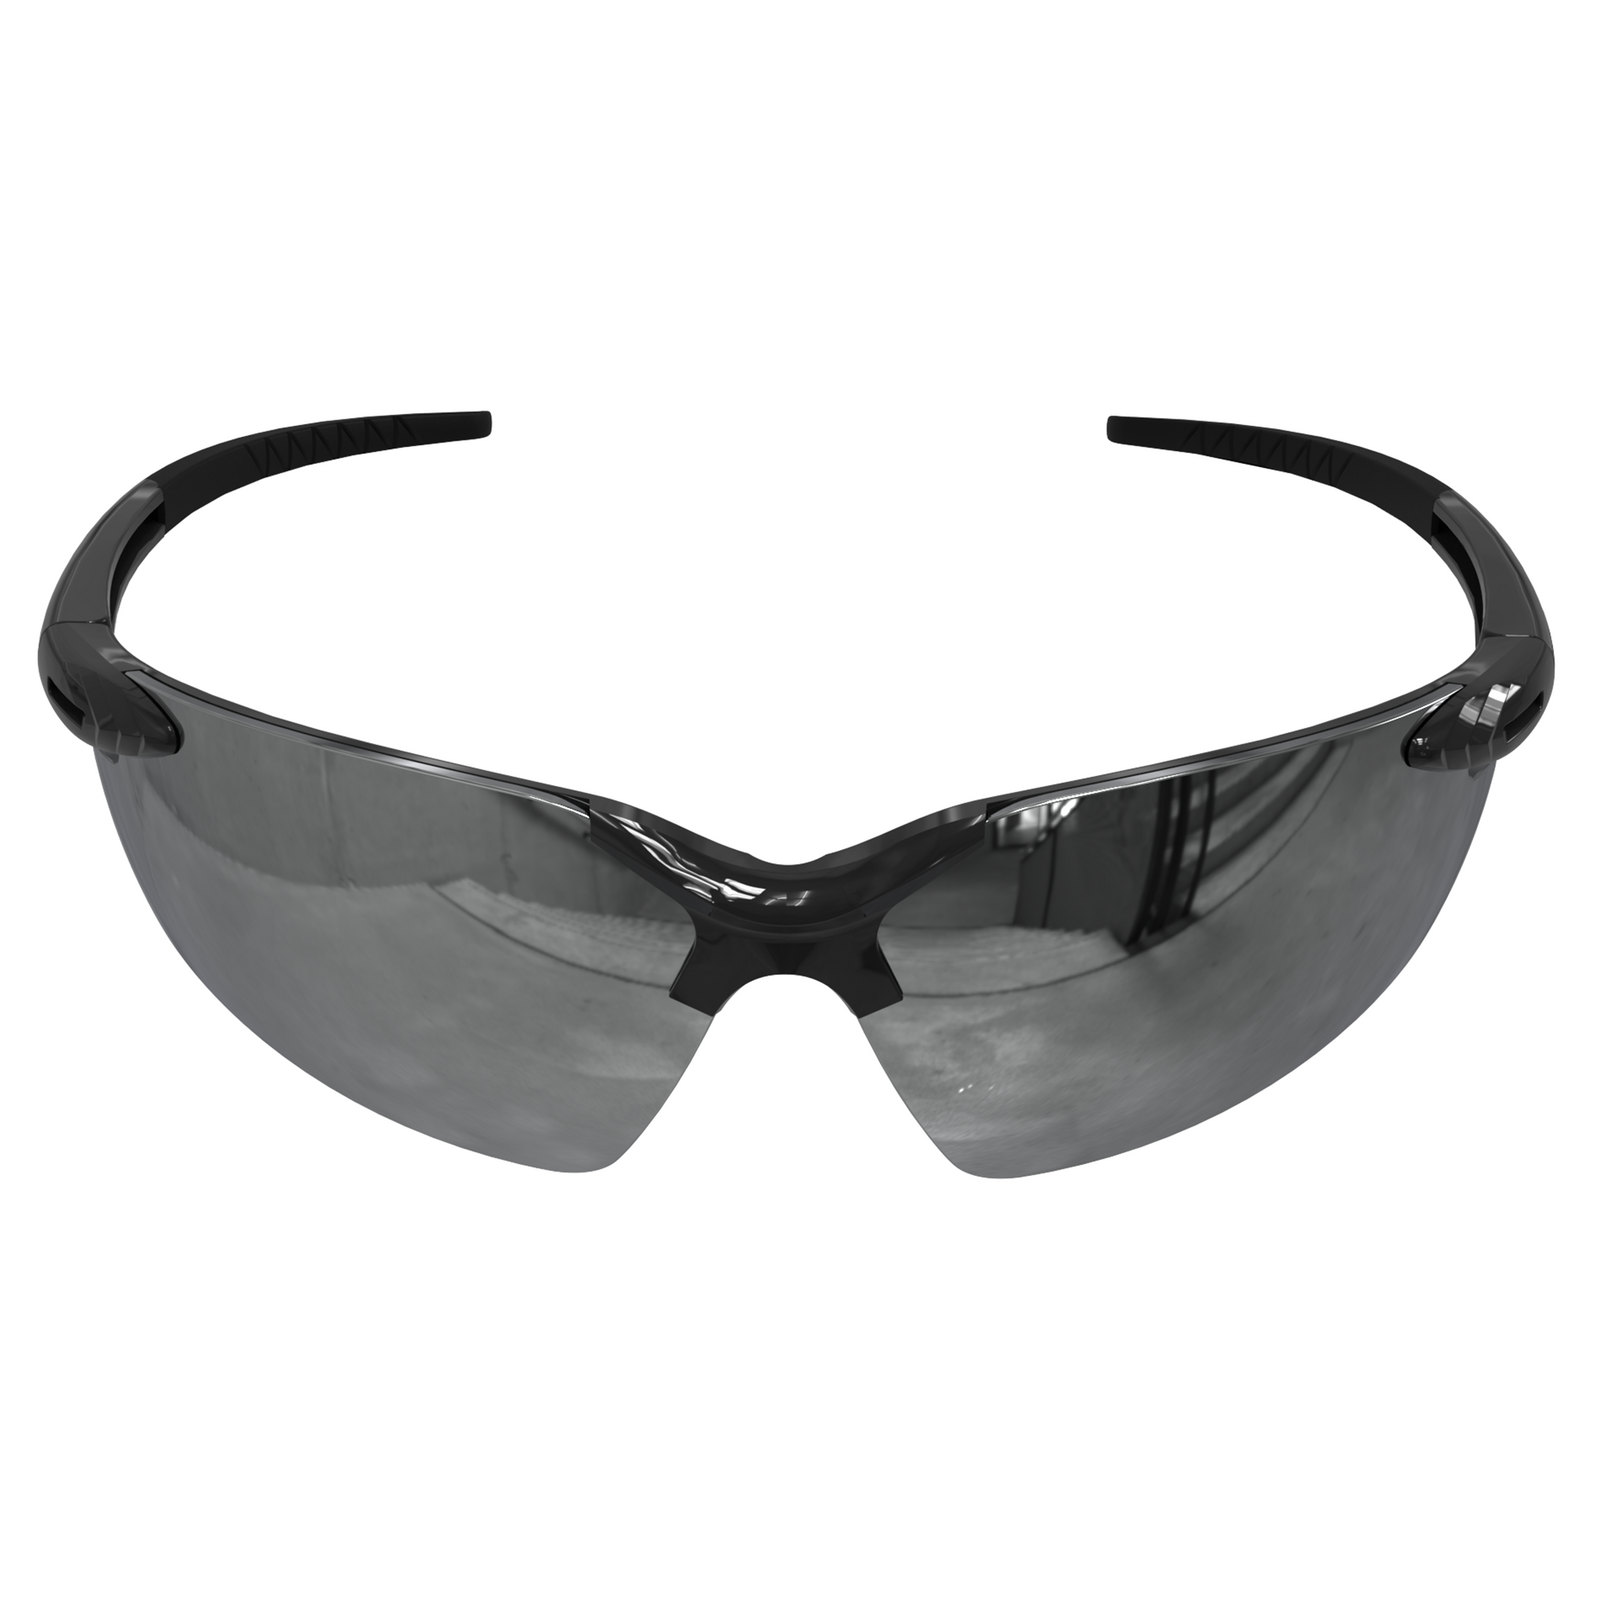 The wrap around safety glasses with flexible rubber temple tips  for eyewear protection